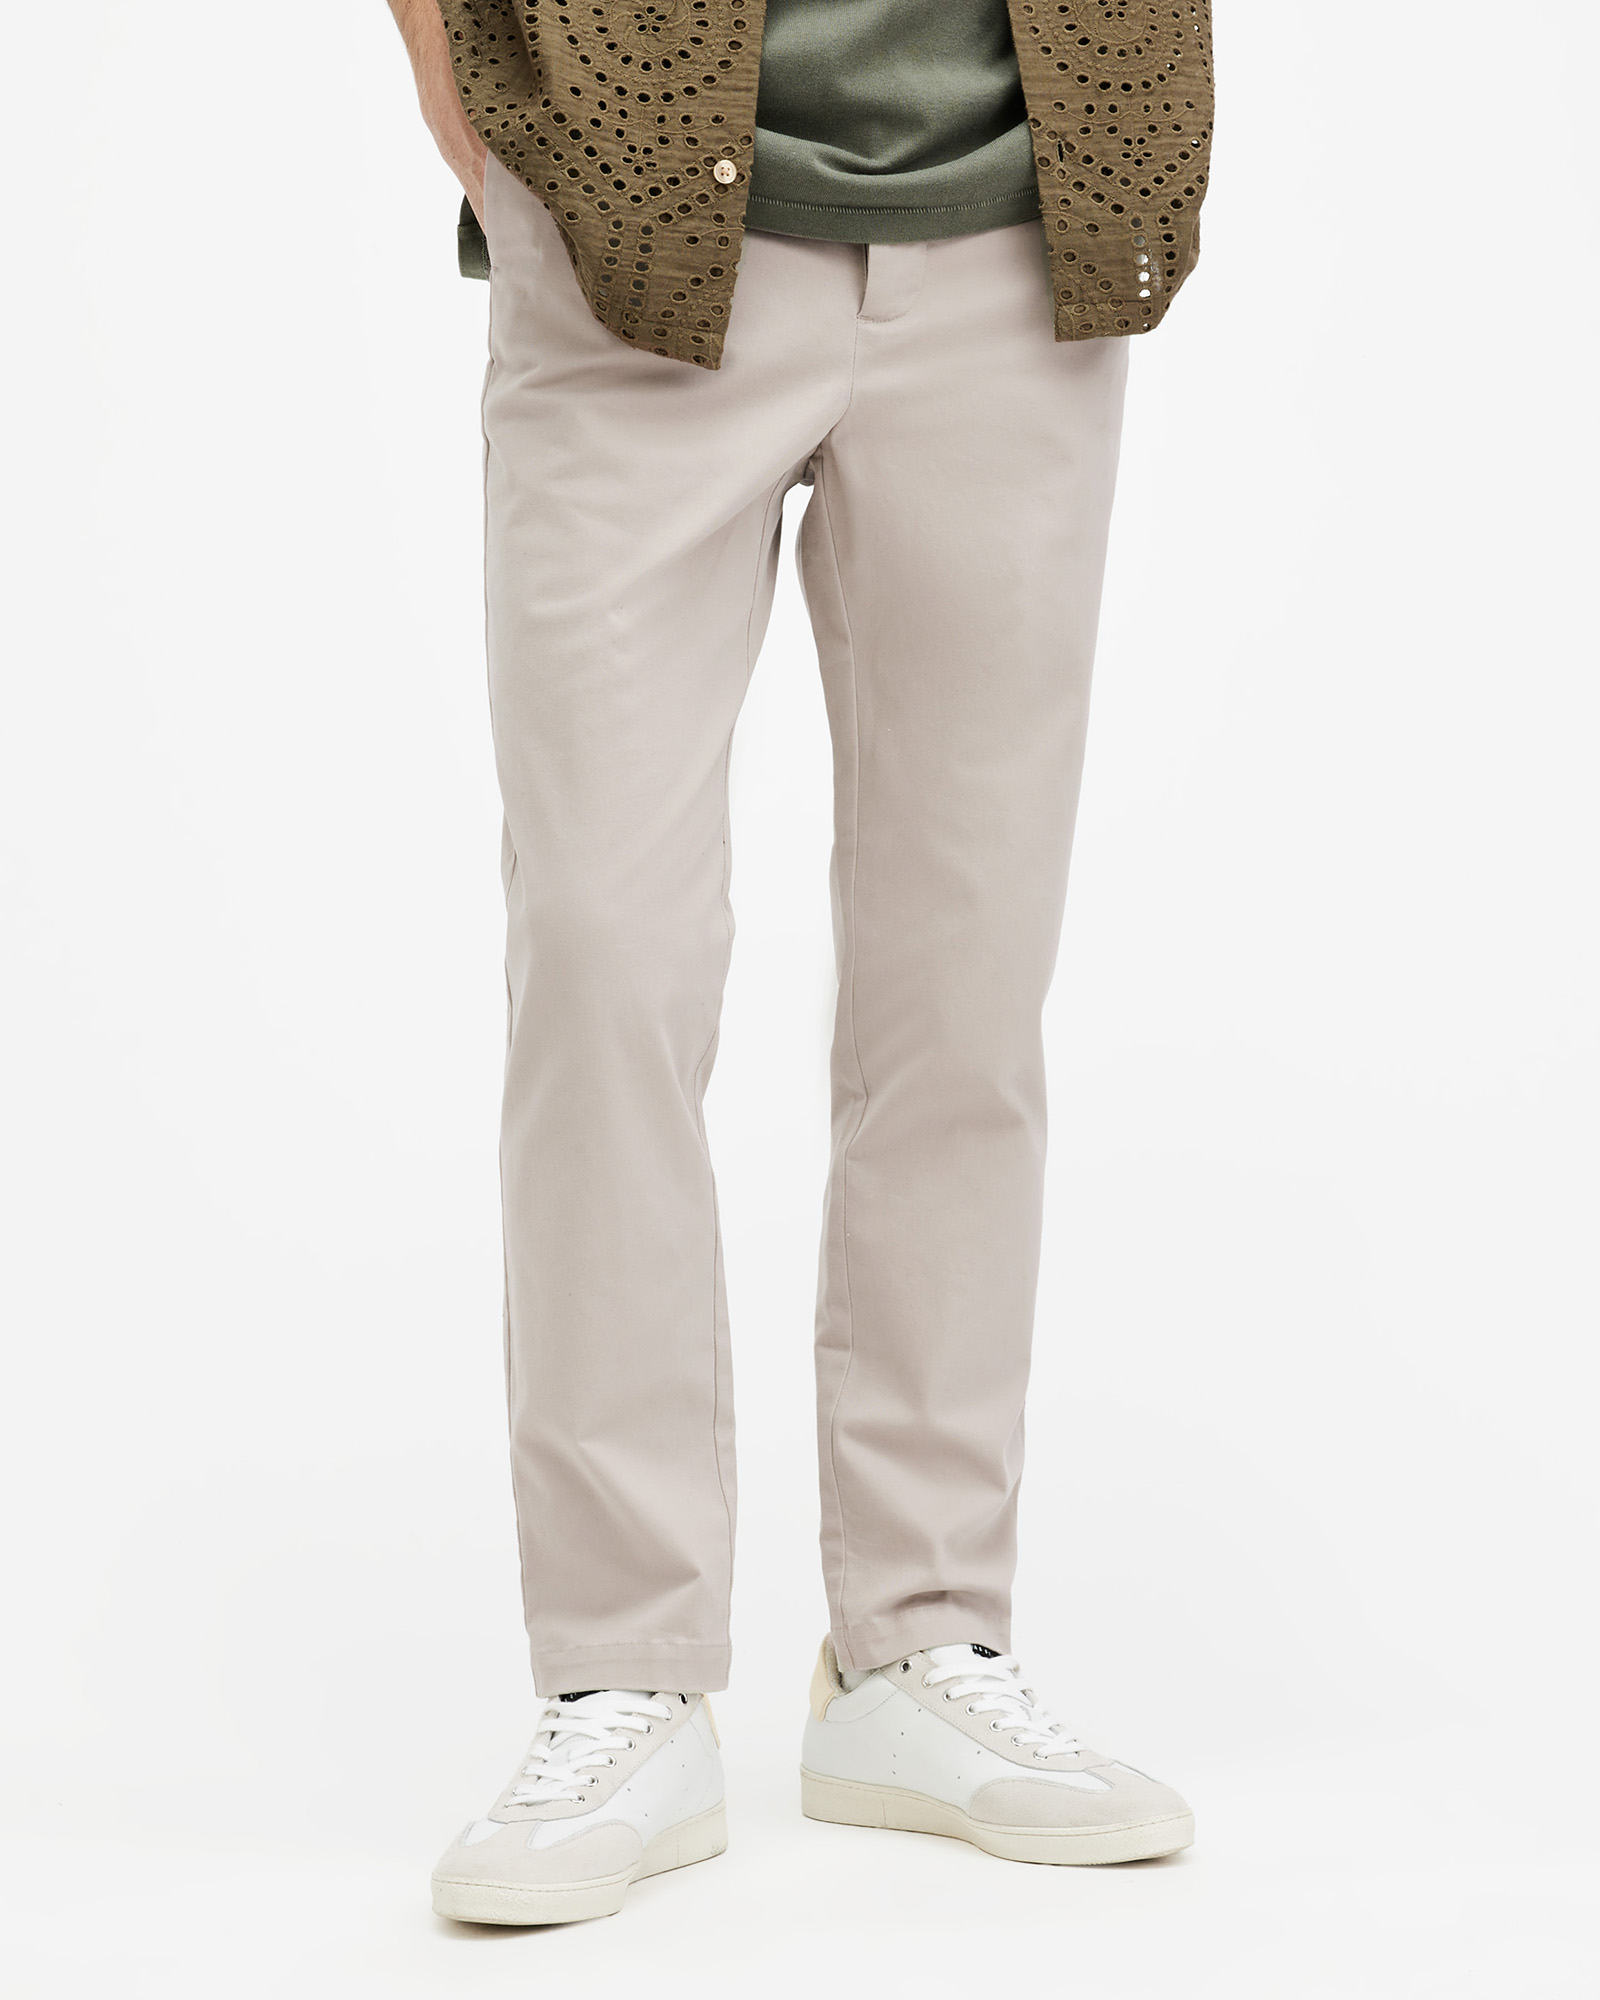 AllSaints Walde Skinny Fit Chino Trousers,, Grey